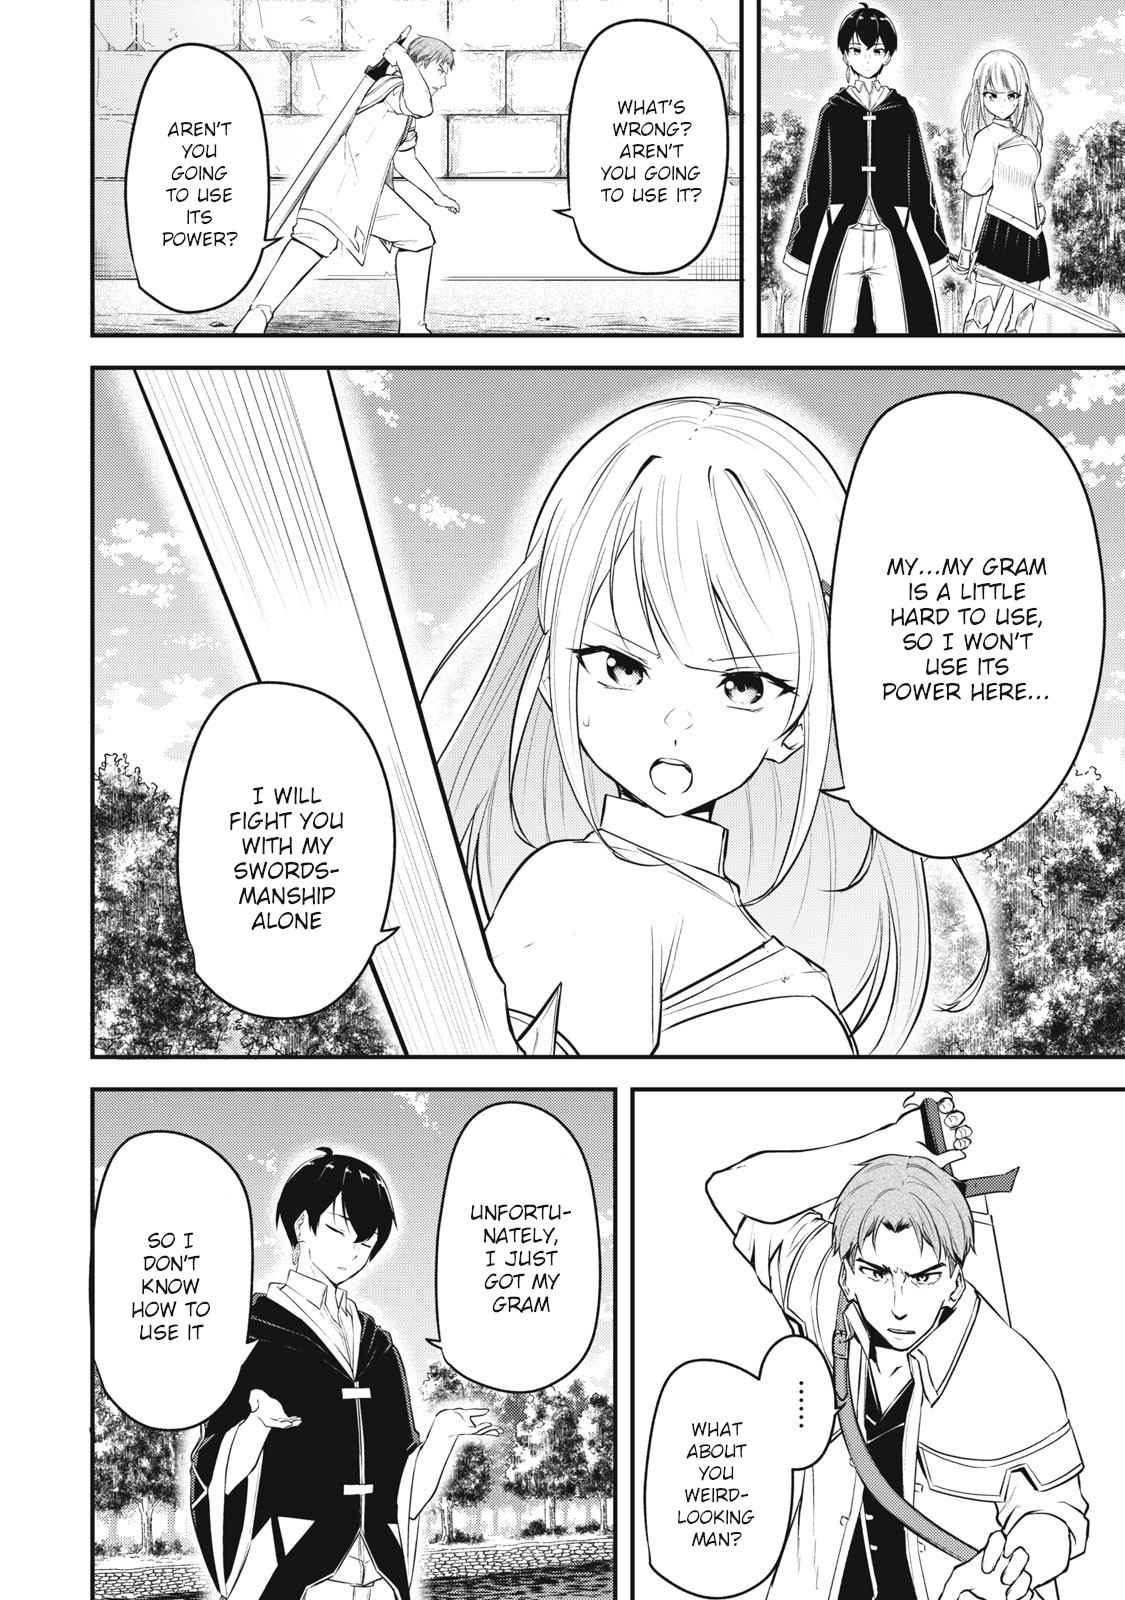 The Last Sage of the Imperial Sword Academy Chapter 3